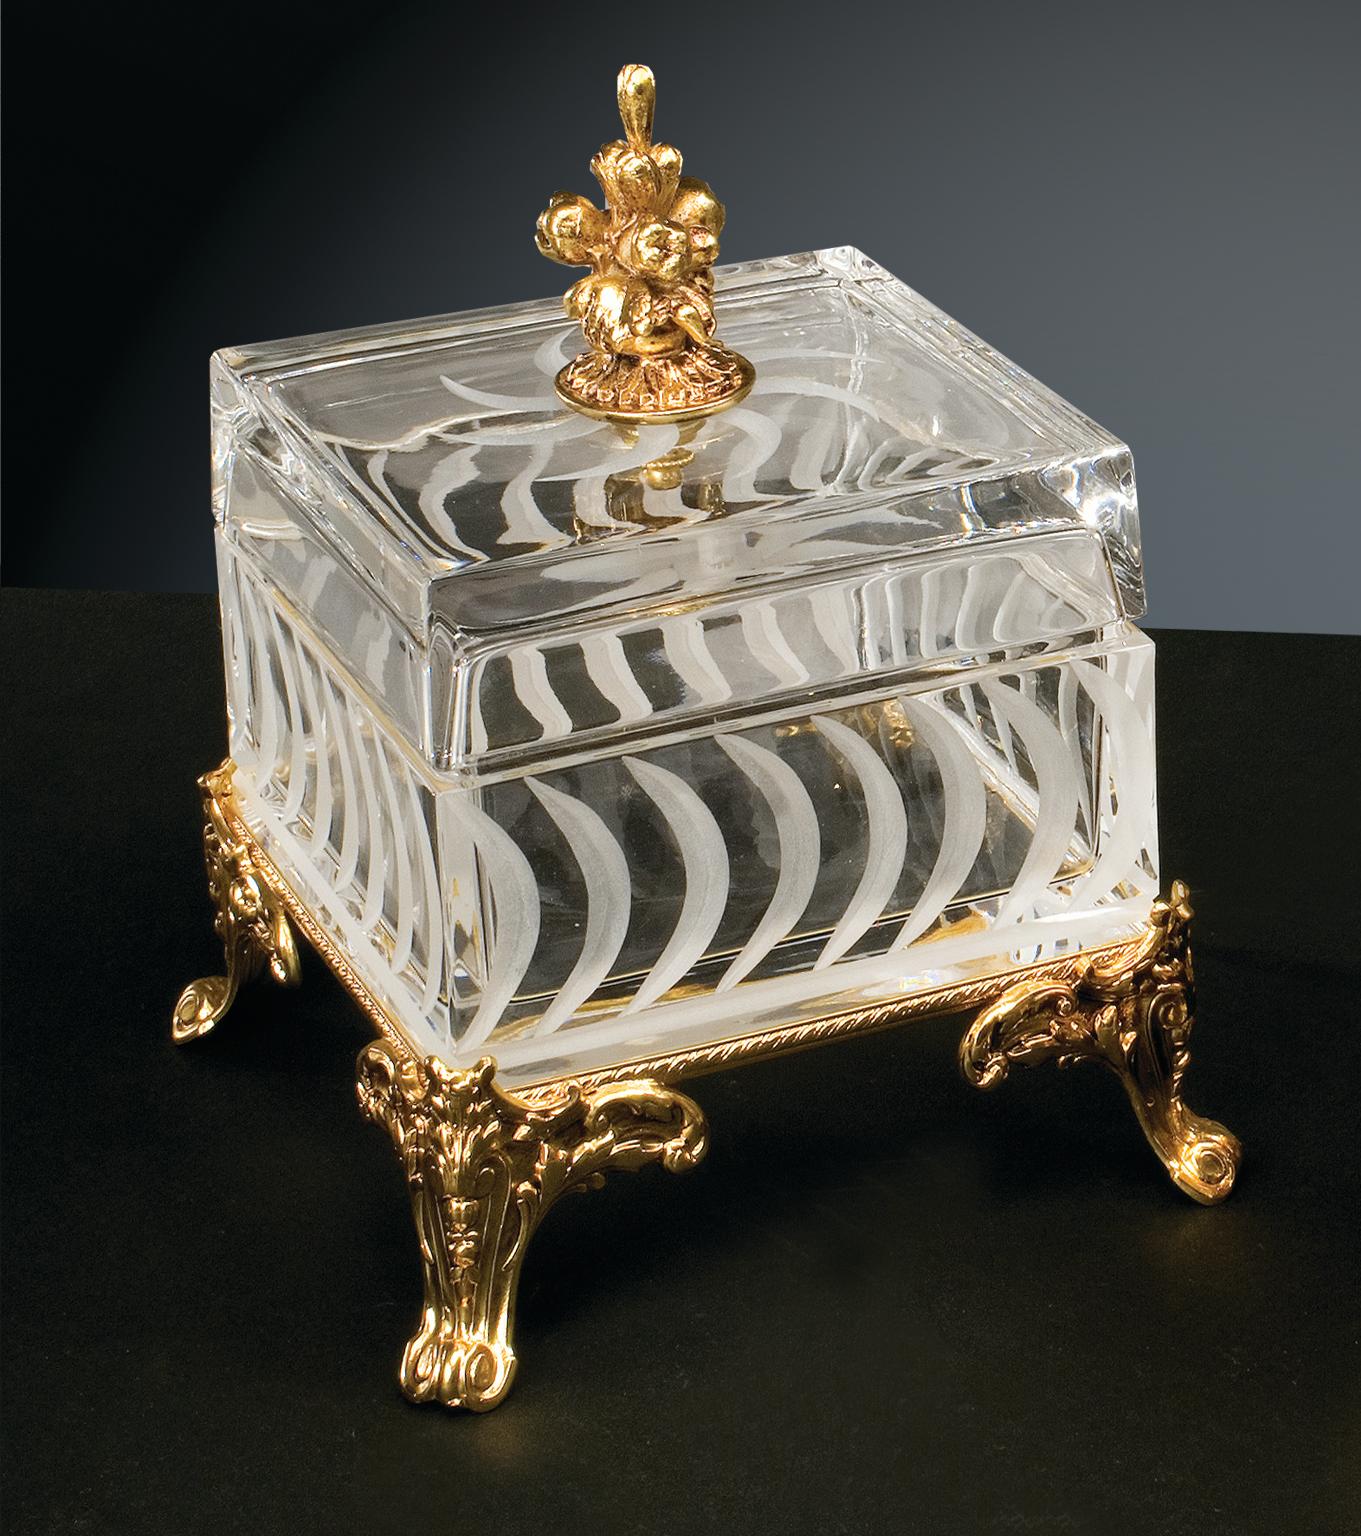 Clear crystal box with opaque cut engravings embellished with brass detail made with the artisan lost wax technique with patinated gold finish. Each object is handcrafted and the care for every detail makes each item unique in its kind.
The style